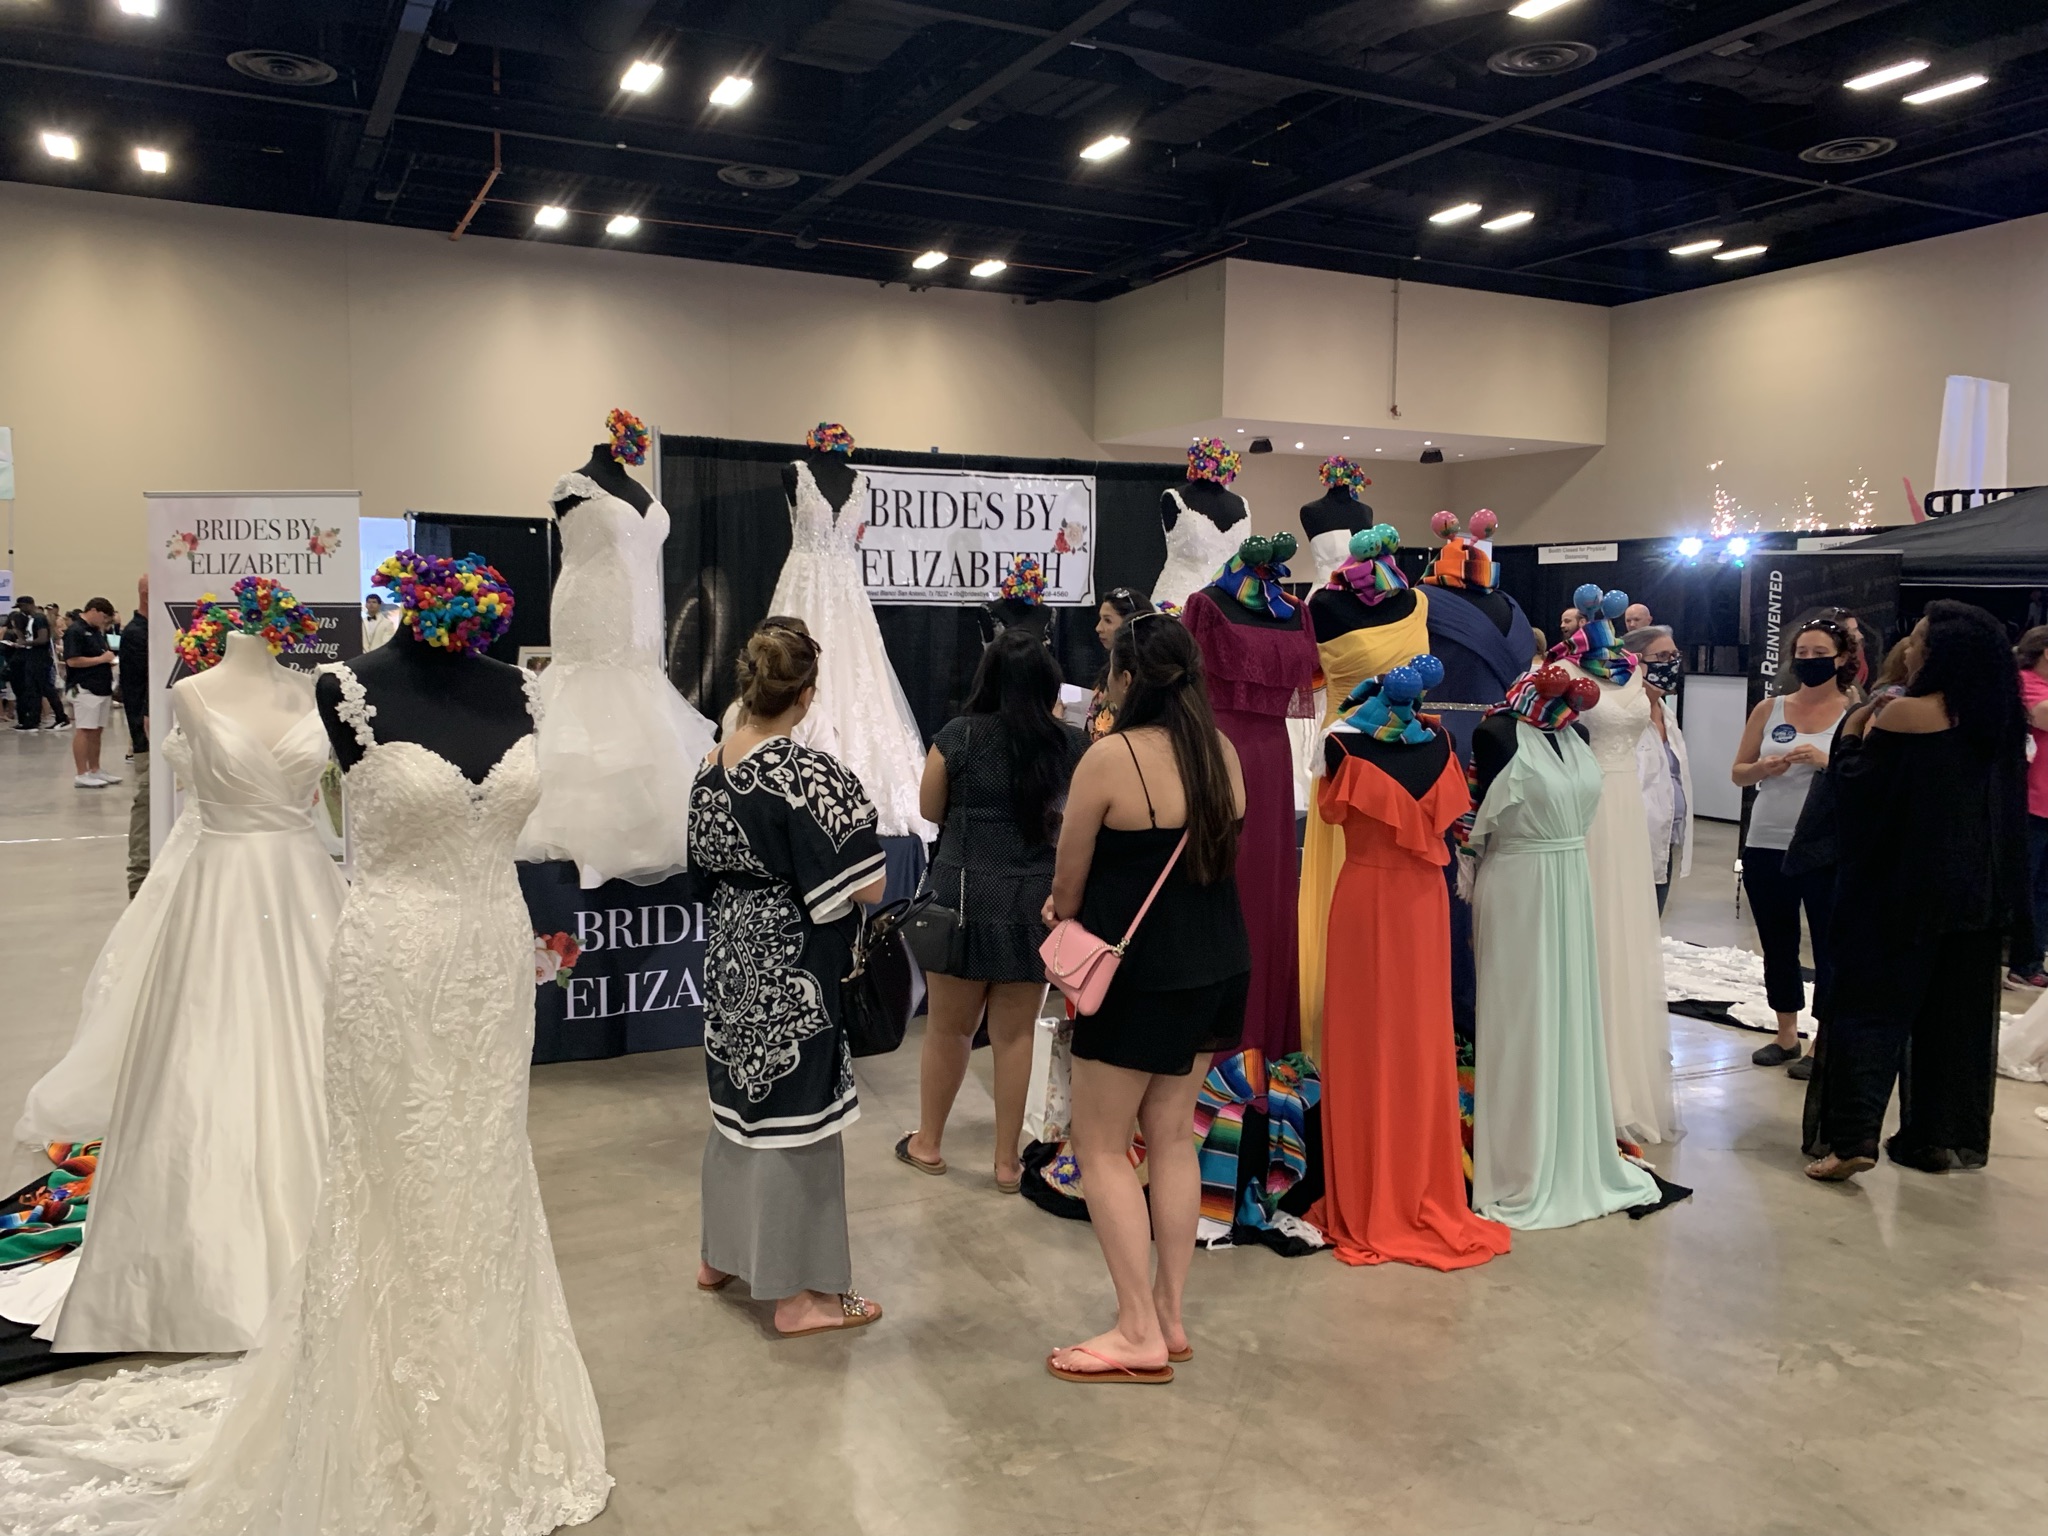 Missed the San Antonio Bridal Extravaganza? Check out all the